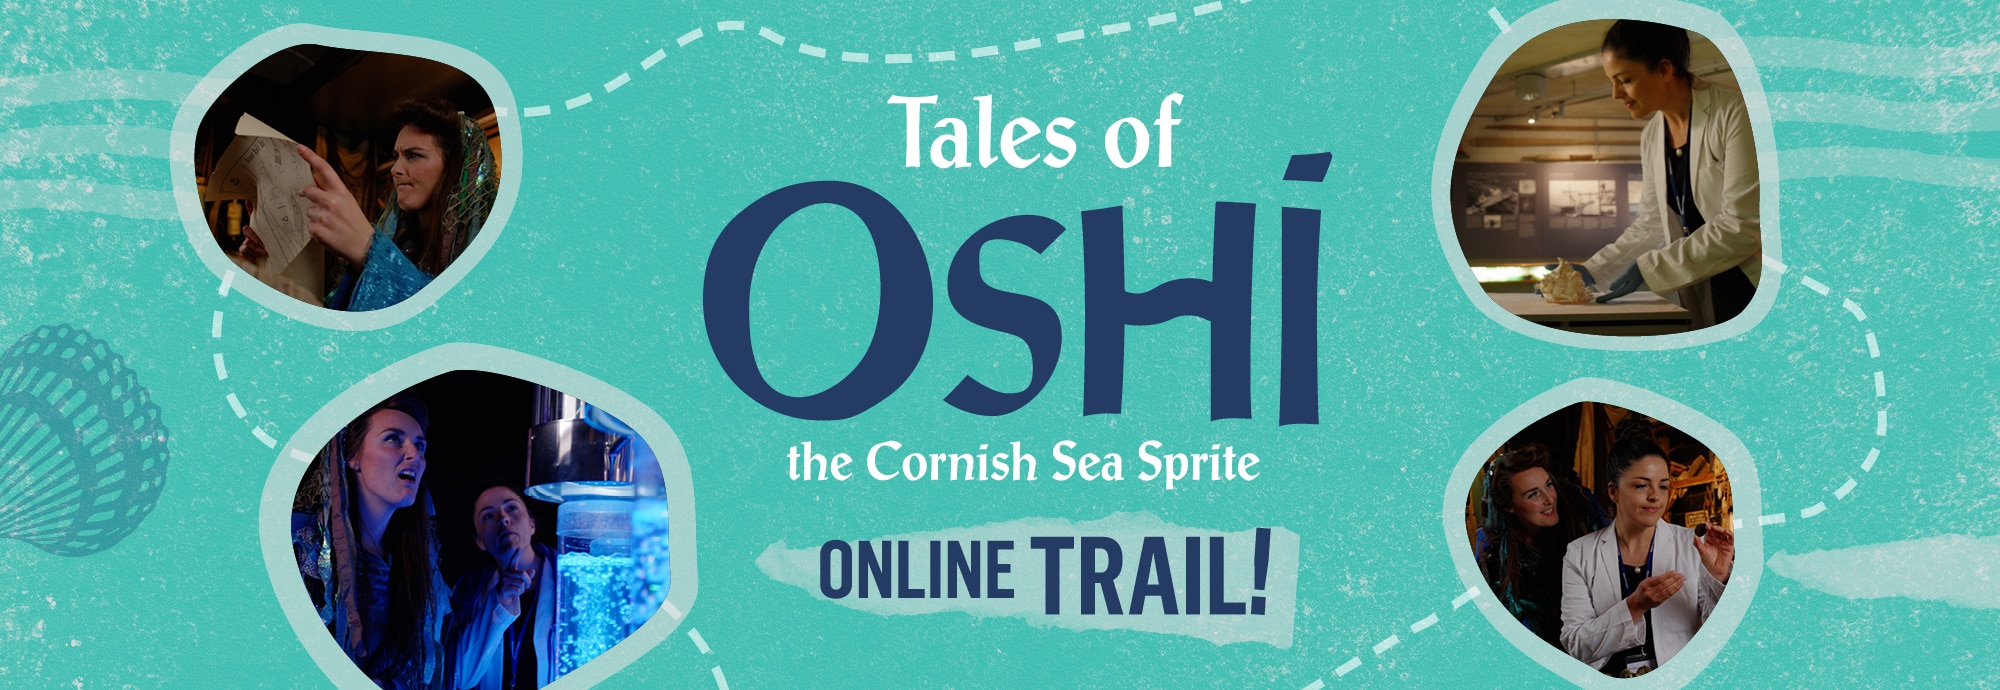 Text in the centre reads 'Tales of Oshi the Cornish Sea Sprite' and 'online trail!'. Image also features four photos: a woman holding up a map, two women looking at a display case, a woman in a white lab coat putting an object on a table, and two women examining another object.